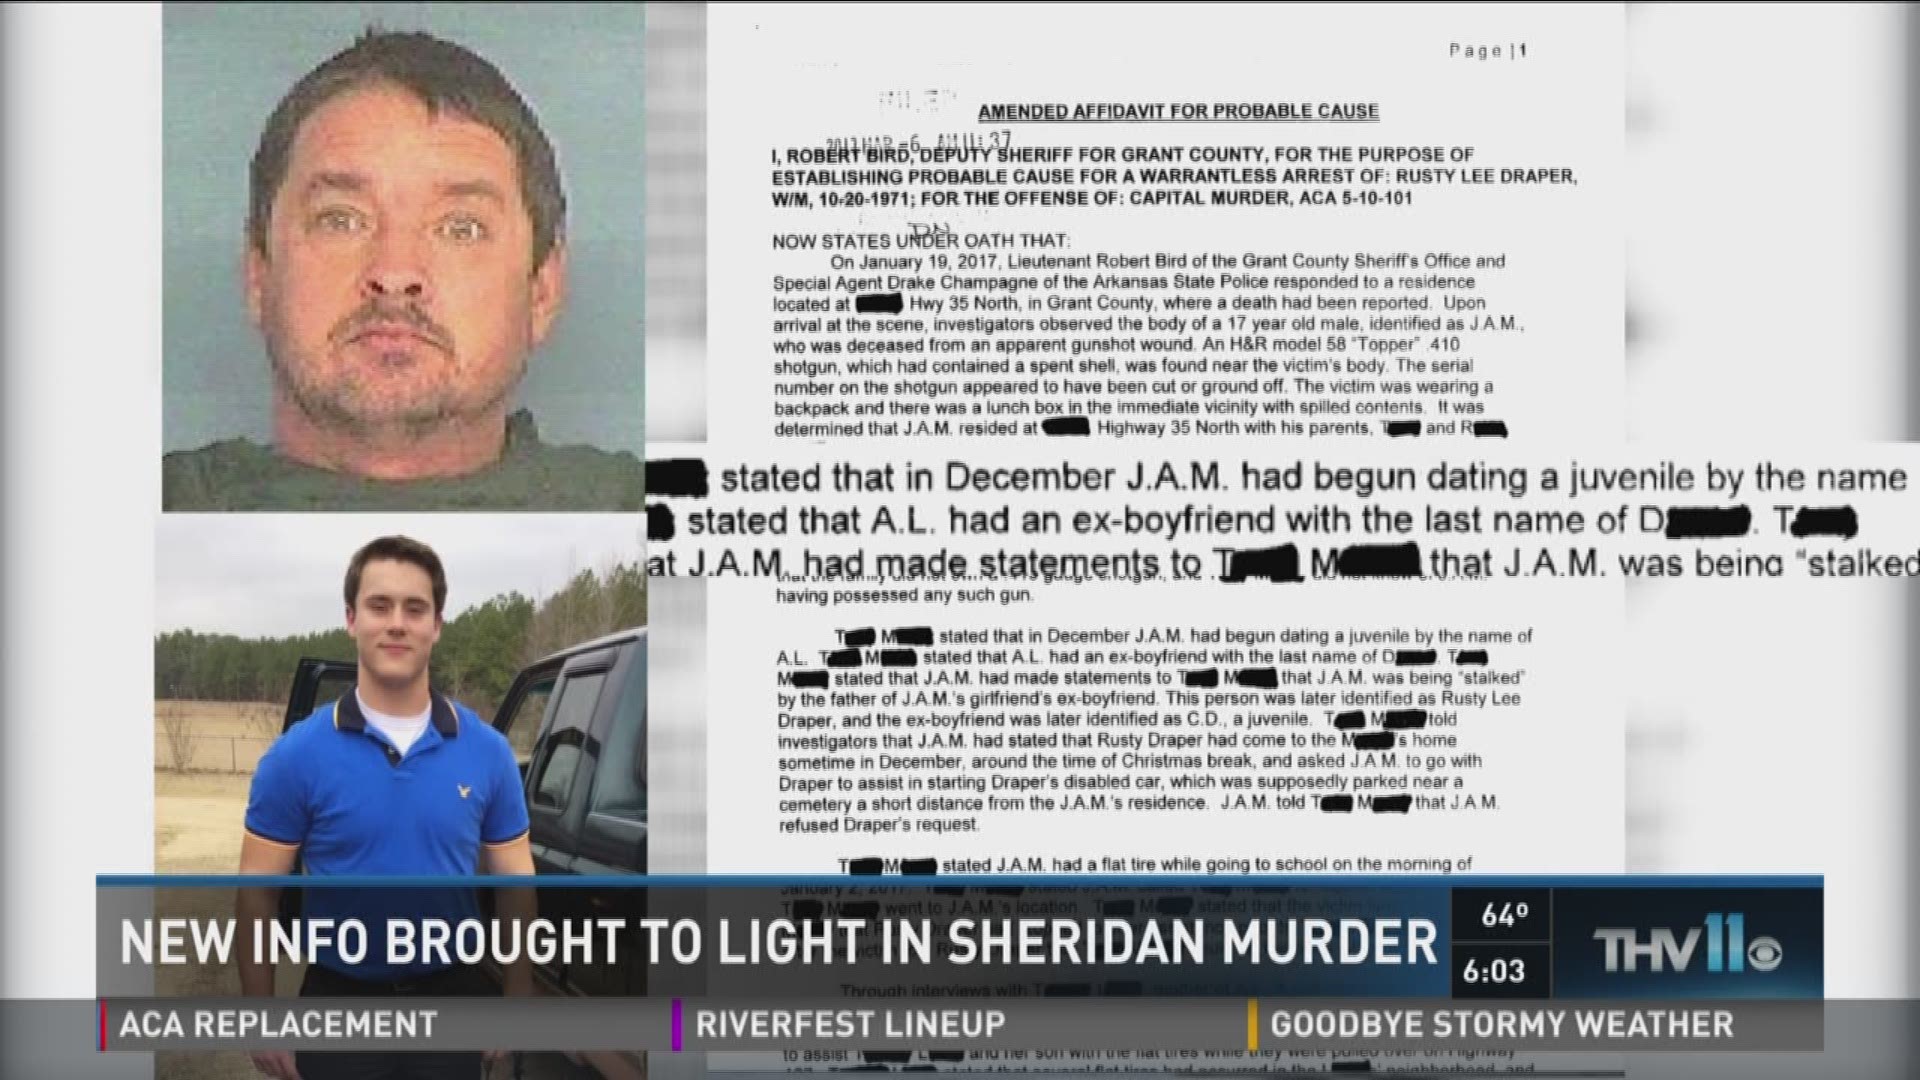 New info brought to light in Sheridan murder